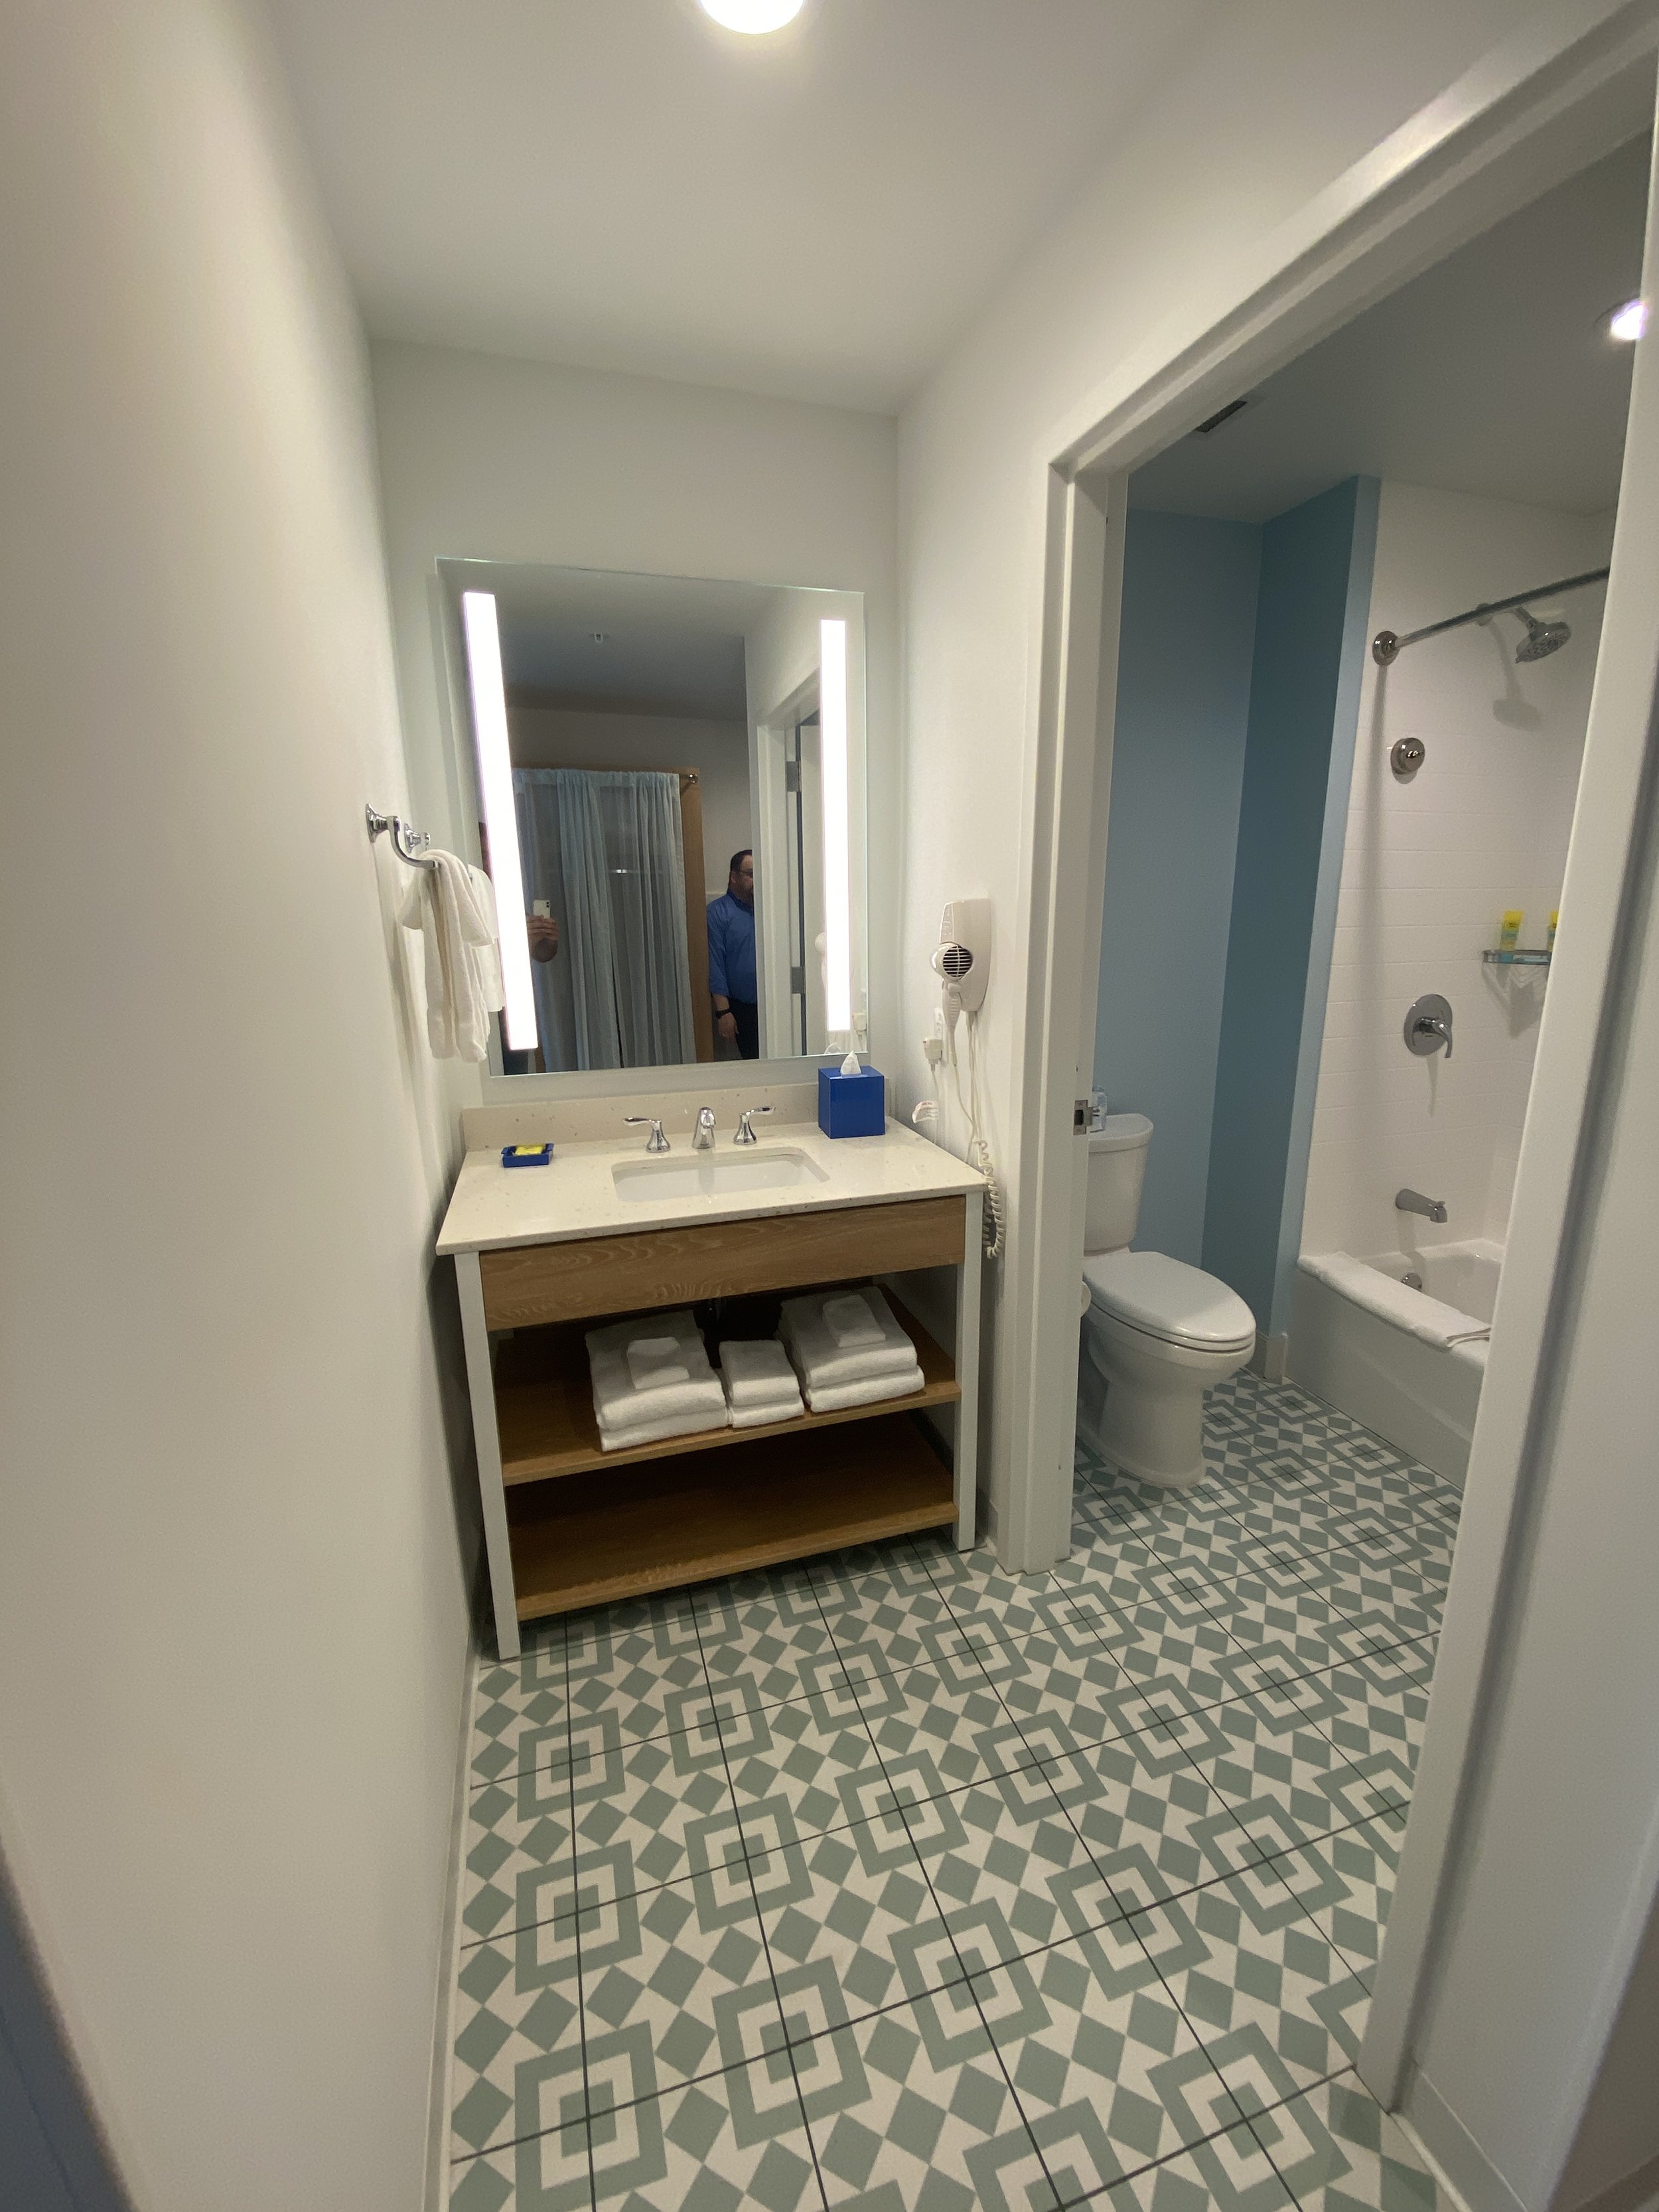  Bathrooms have a separate bath and vanity area so multiple people can get ready at once. 